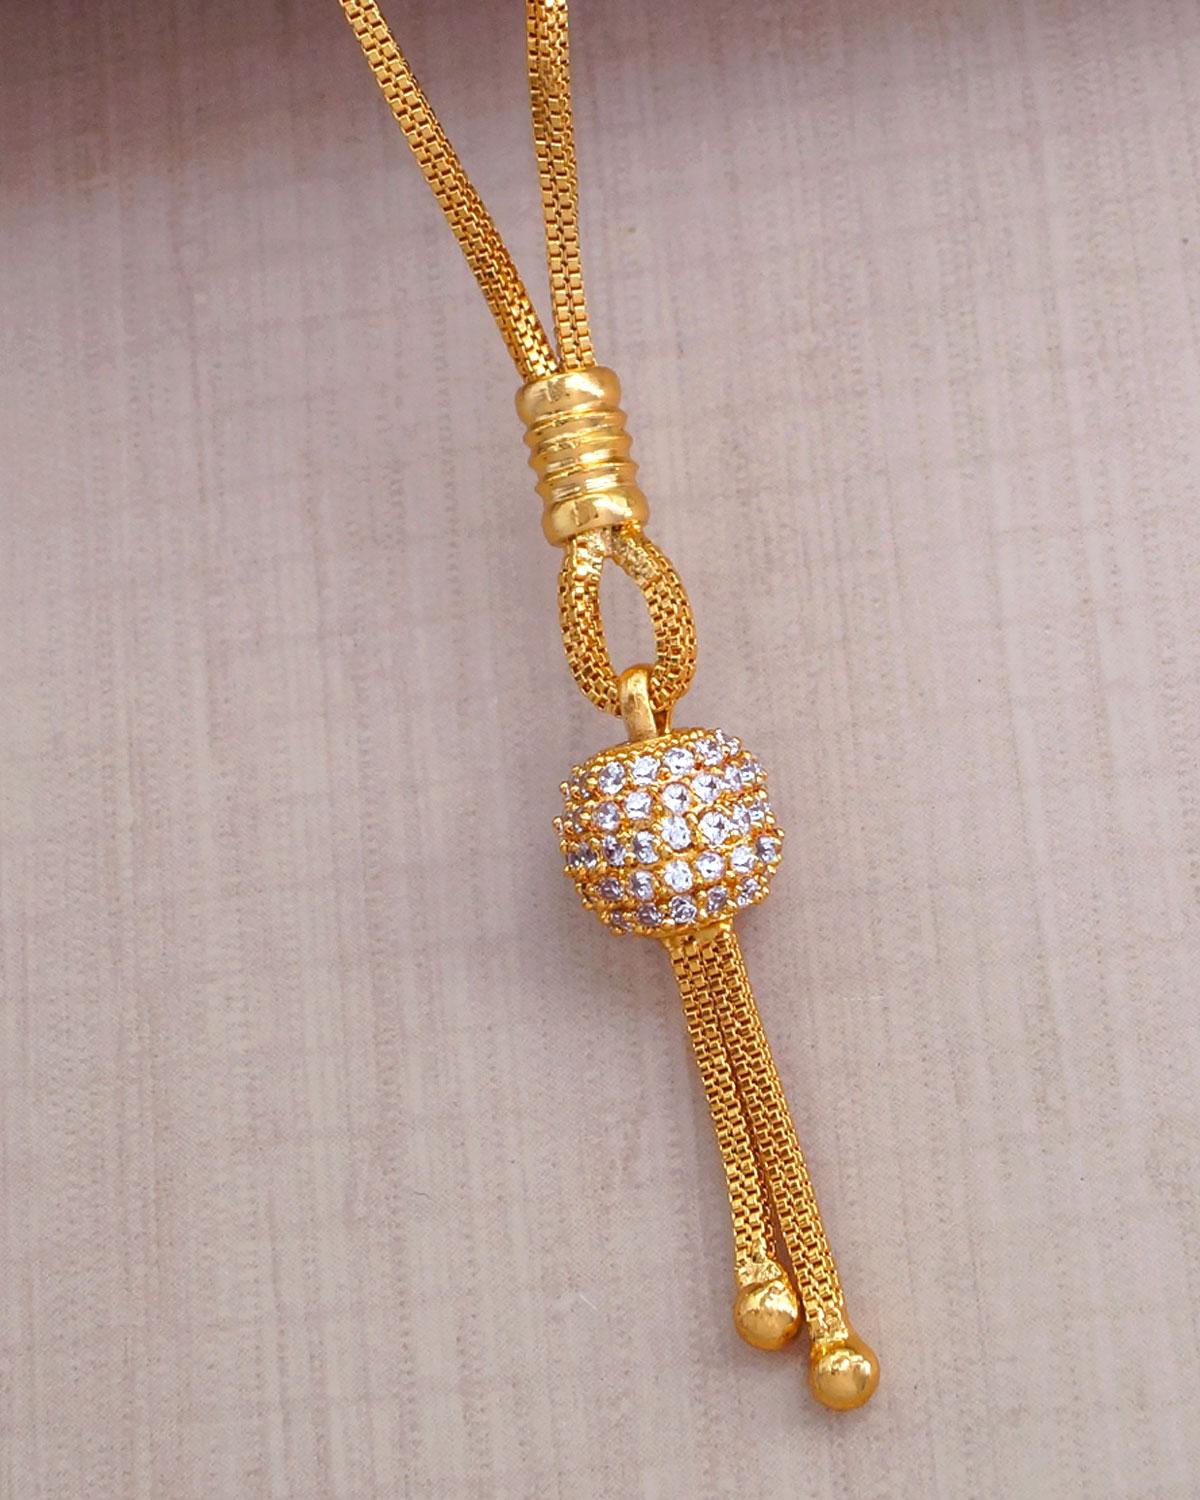 22kt Gold Diamond Pendant with 18inches Short Chain